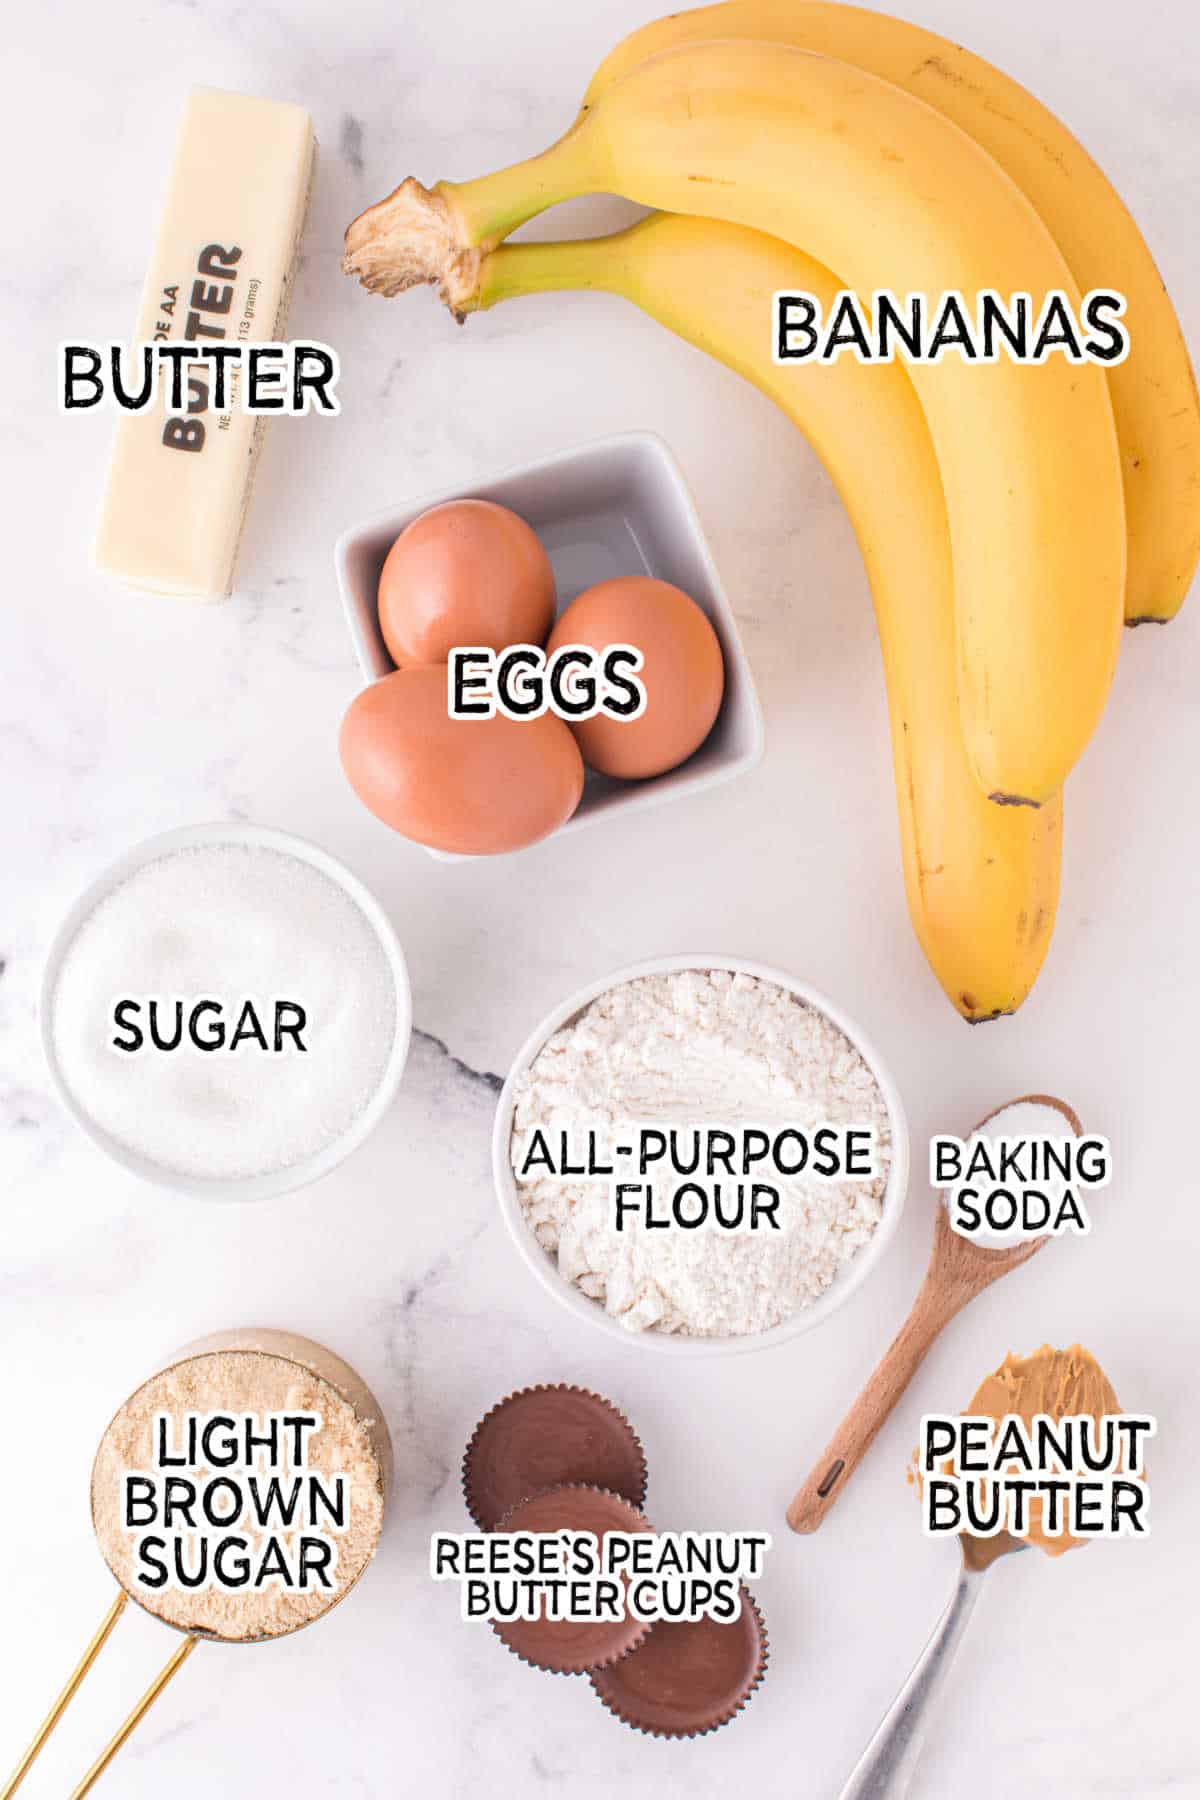 Ingredients to make Reese's Peanut Butter Banana Bread